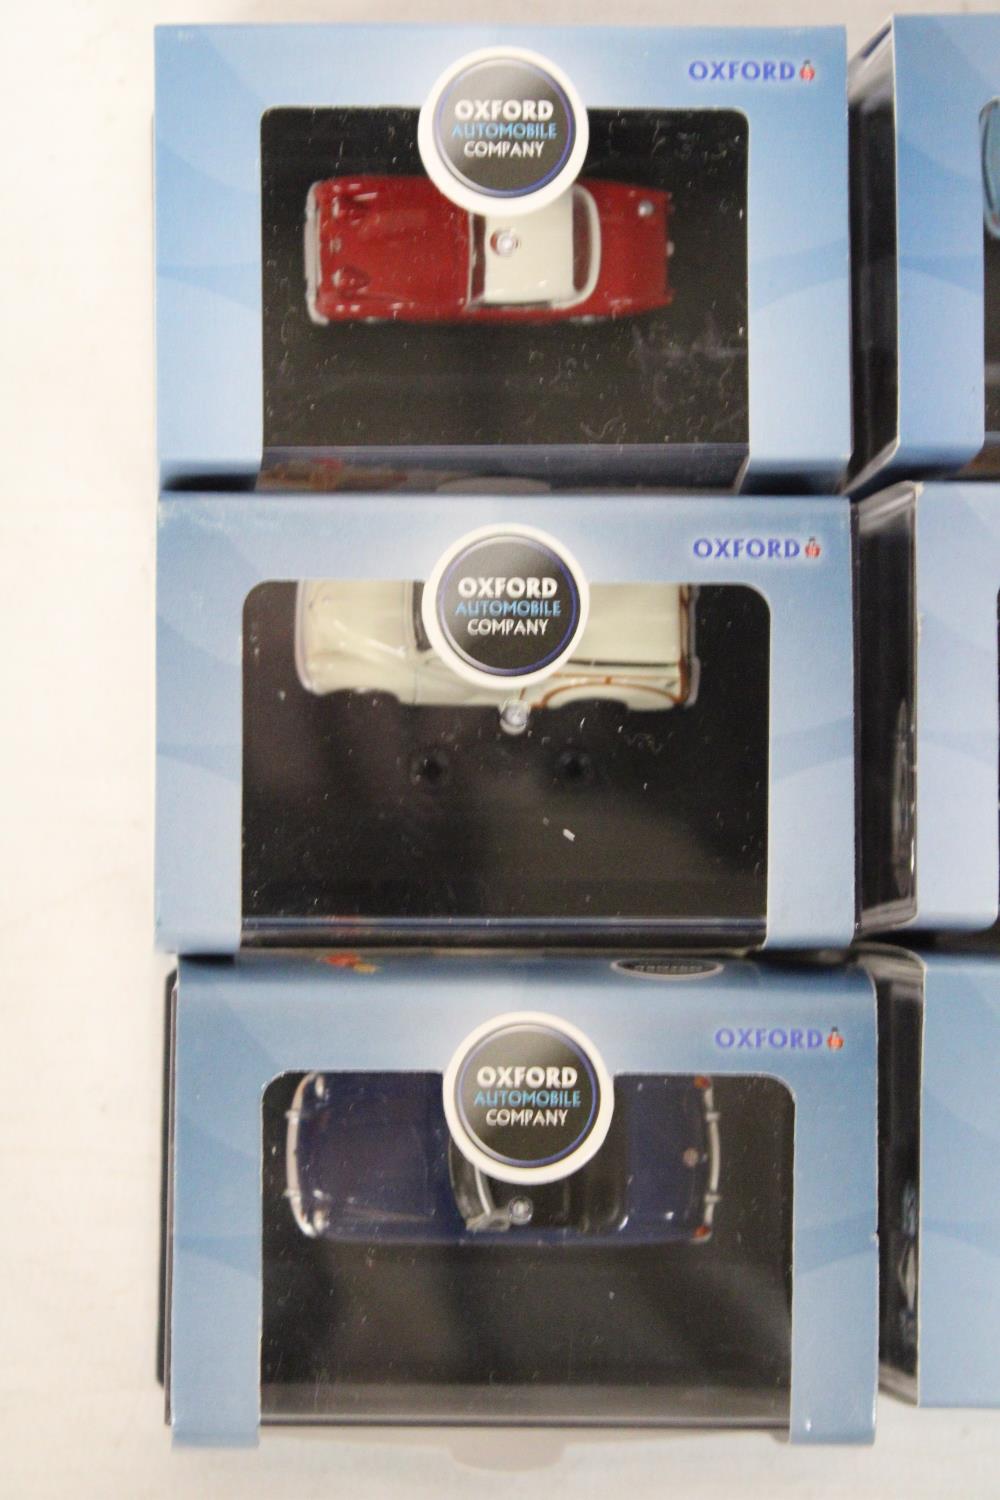 SIX VARIOUS AS NEW AND BOXED OXFORD AUTOMOBILE COMPANY VEHICLES - Bild 4 aus 5